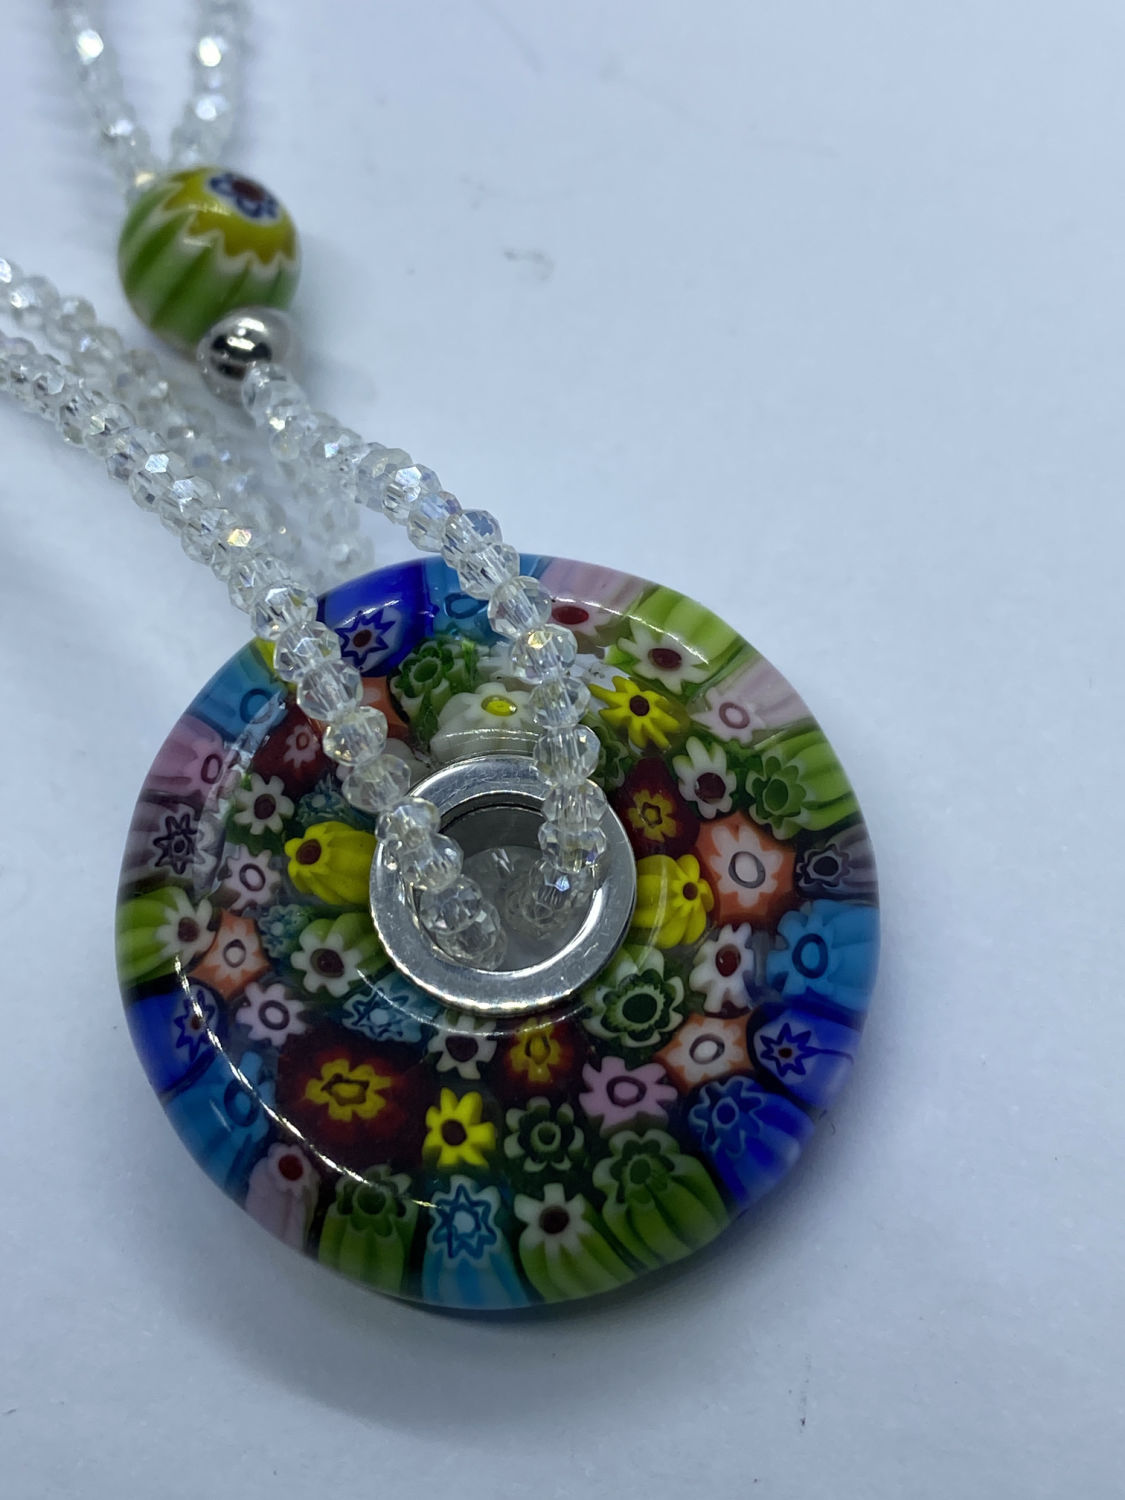 GORGEOUS PATTERNED SPARKLY MURANO GLASS NECKLACE APPROX. 18' LONG - Image 2 of 5